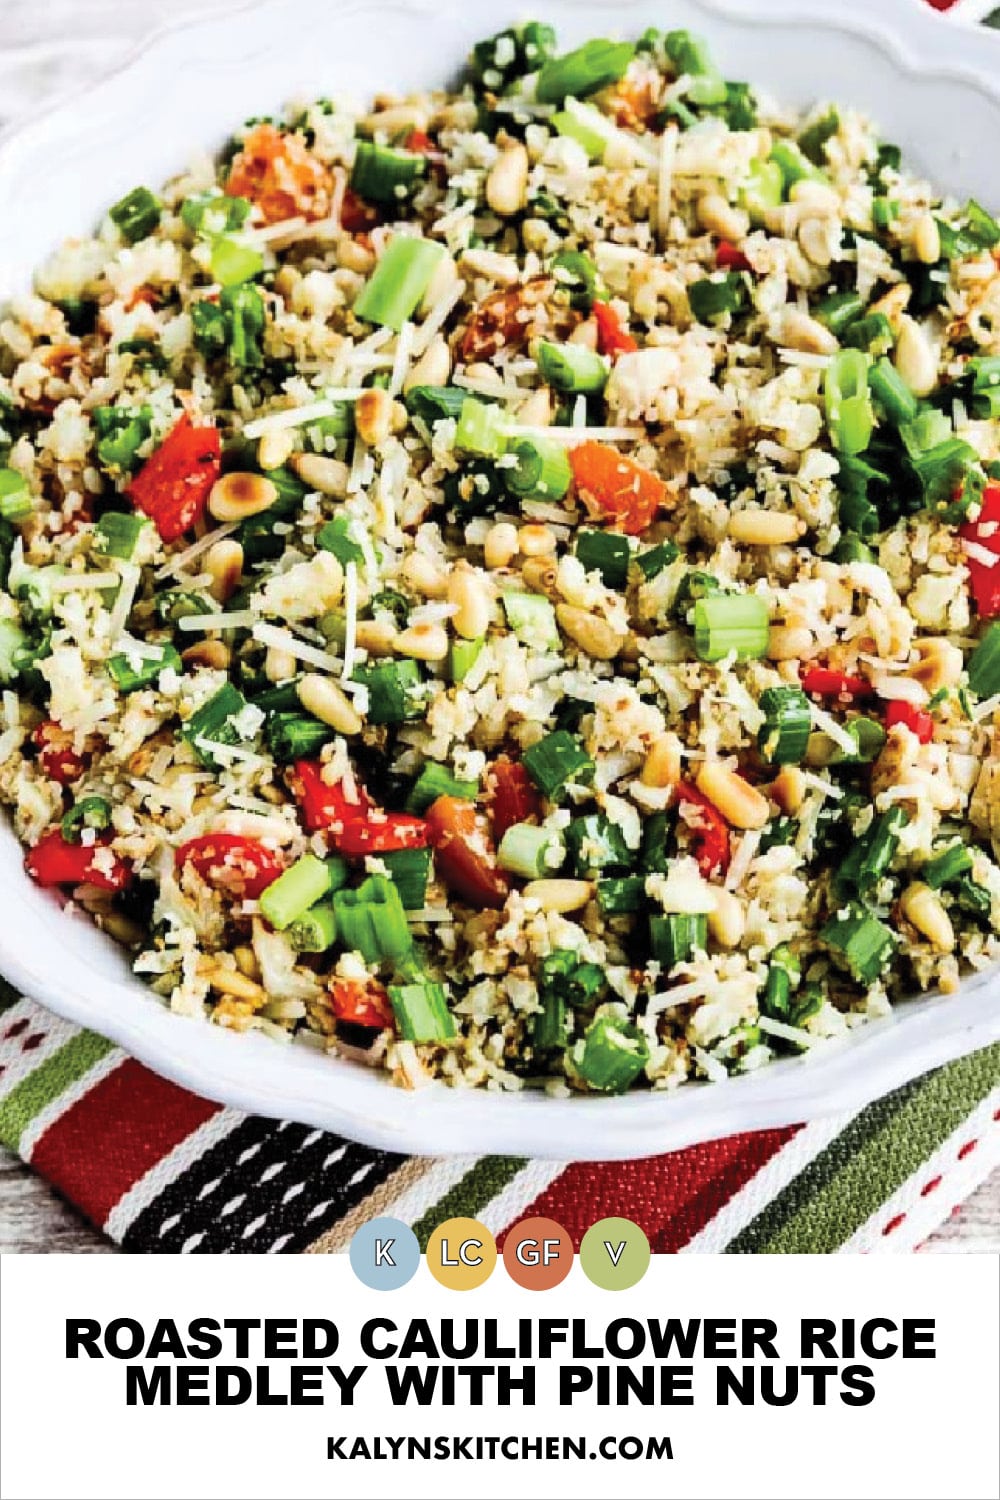 Pinterest image of Roasted Cauliflower Rice Medley with Pine Nuts